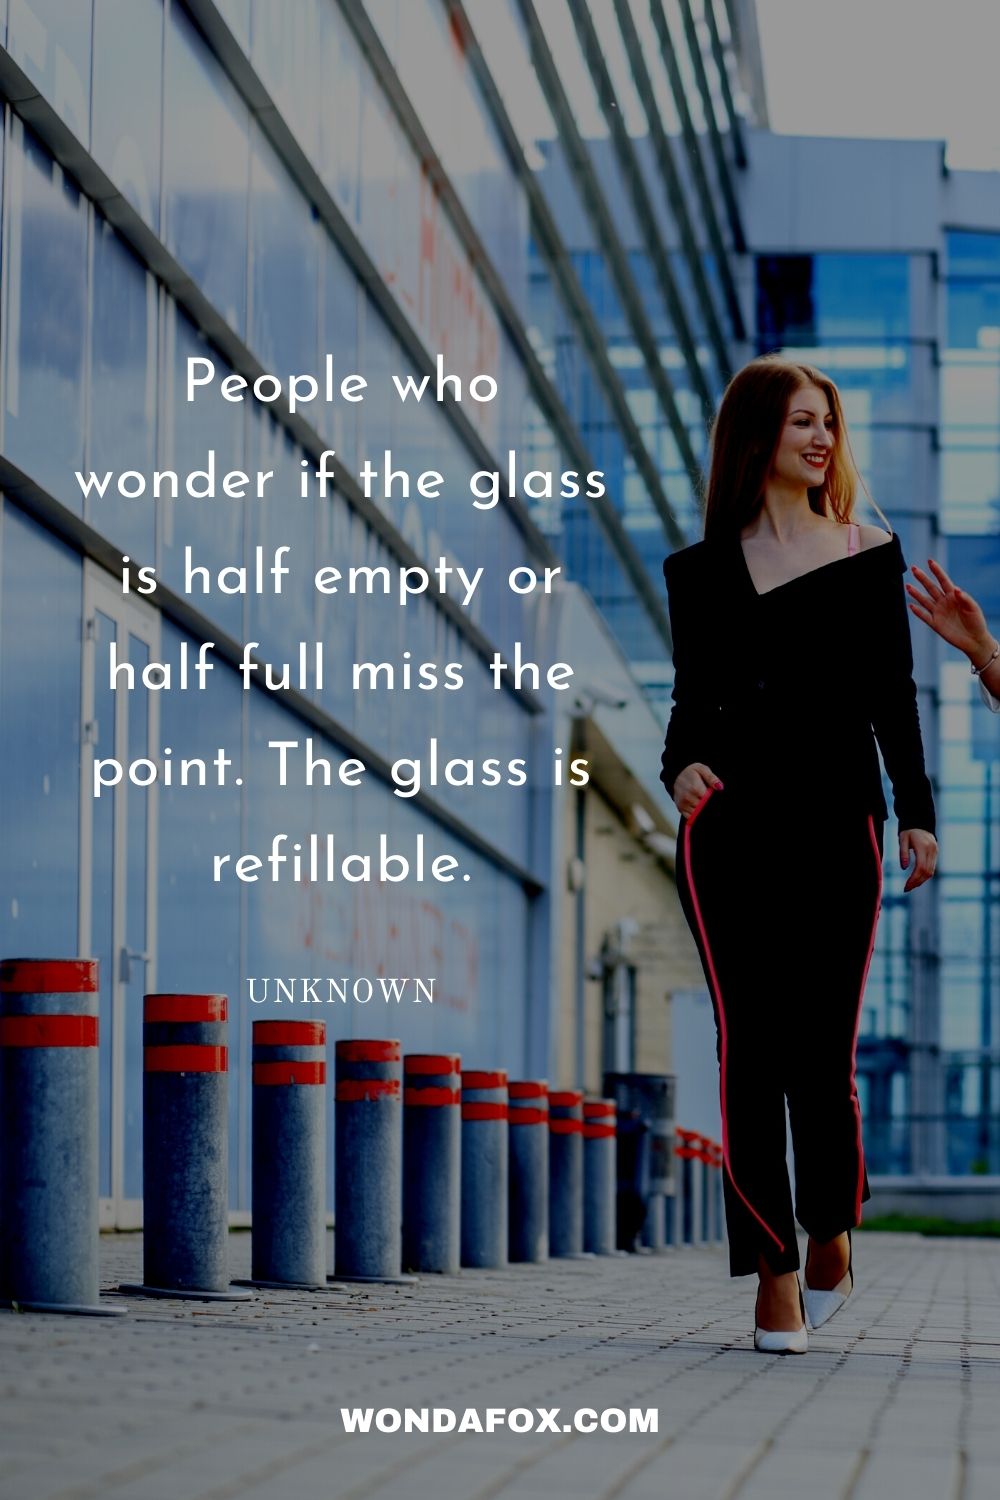 People who wonder if the glass is half empty or half full miss the point. The glass is refillable.